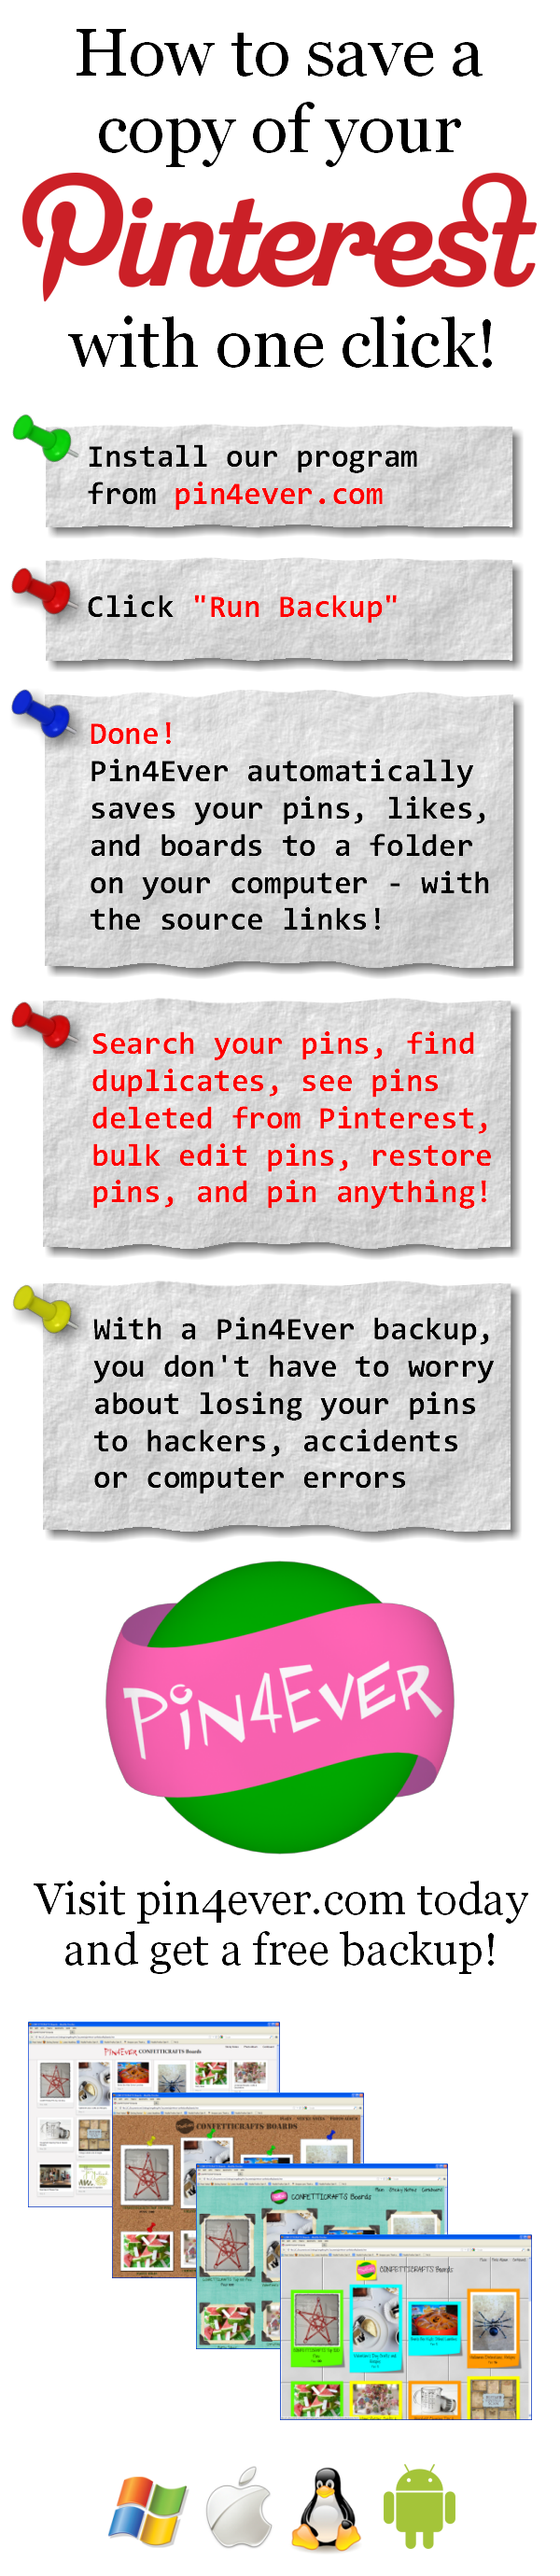 Are your pins protected? Pin4Ever has saved, edited or uploaded 476,599,722 pins since September 2012. Go to pin4ever.com and try it free!